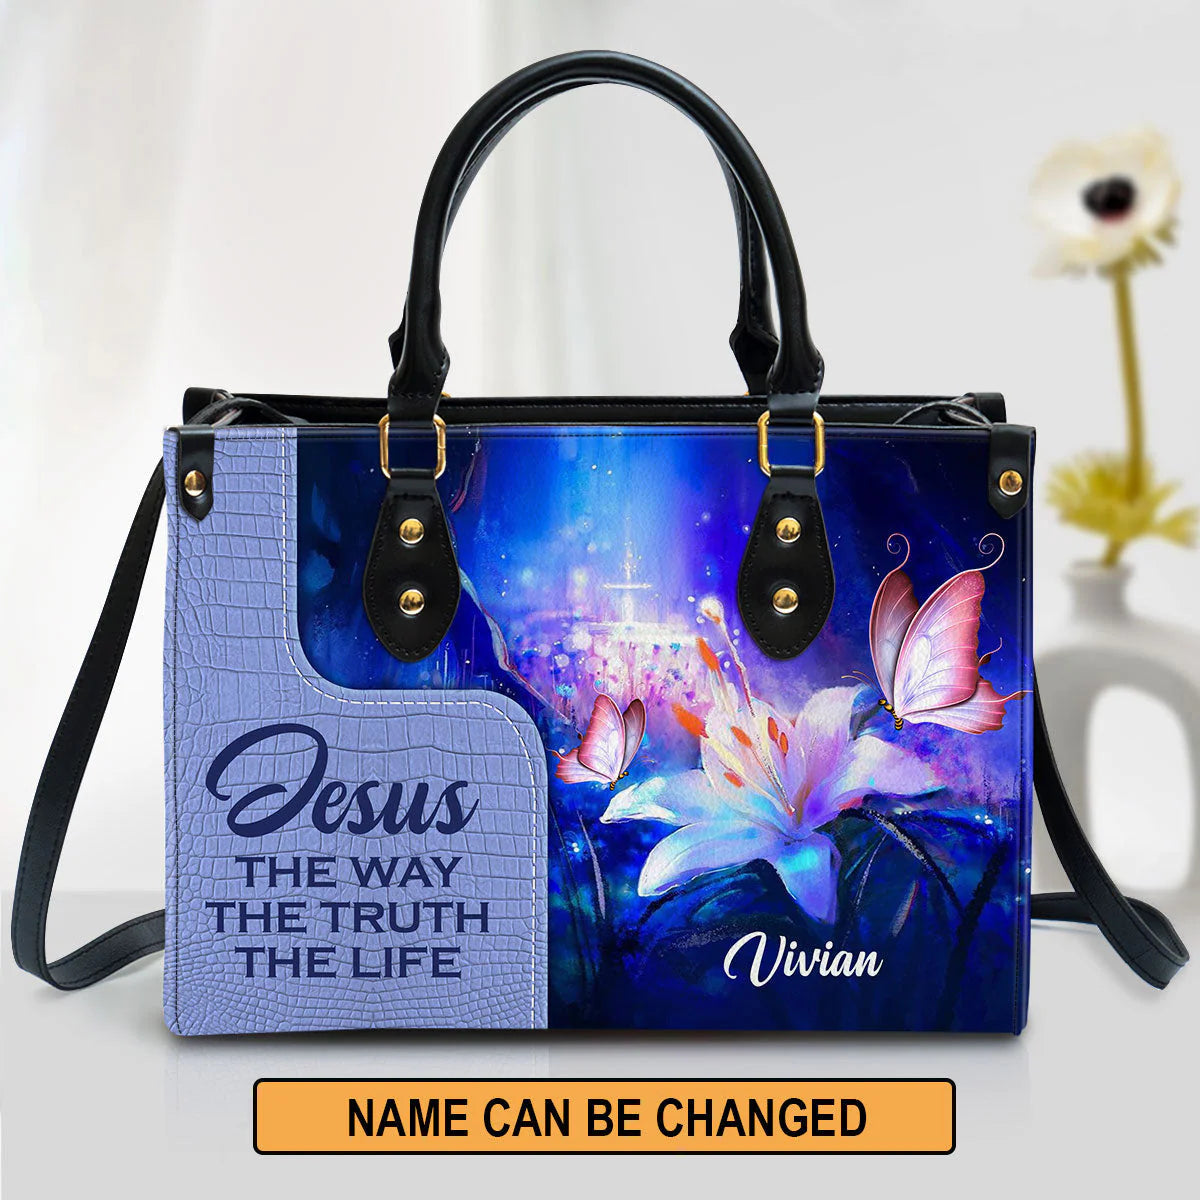 Christianartbag Handbags, Jesus The Way The Truth The Life Leather Bags, Personalized Bags, Gifts for Women, Christmas Gift, CABLTB01300723. - Christian Art Bag